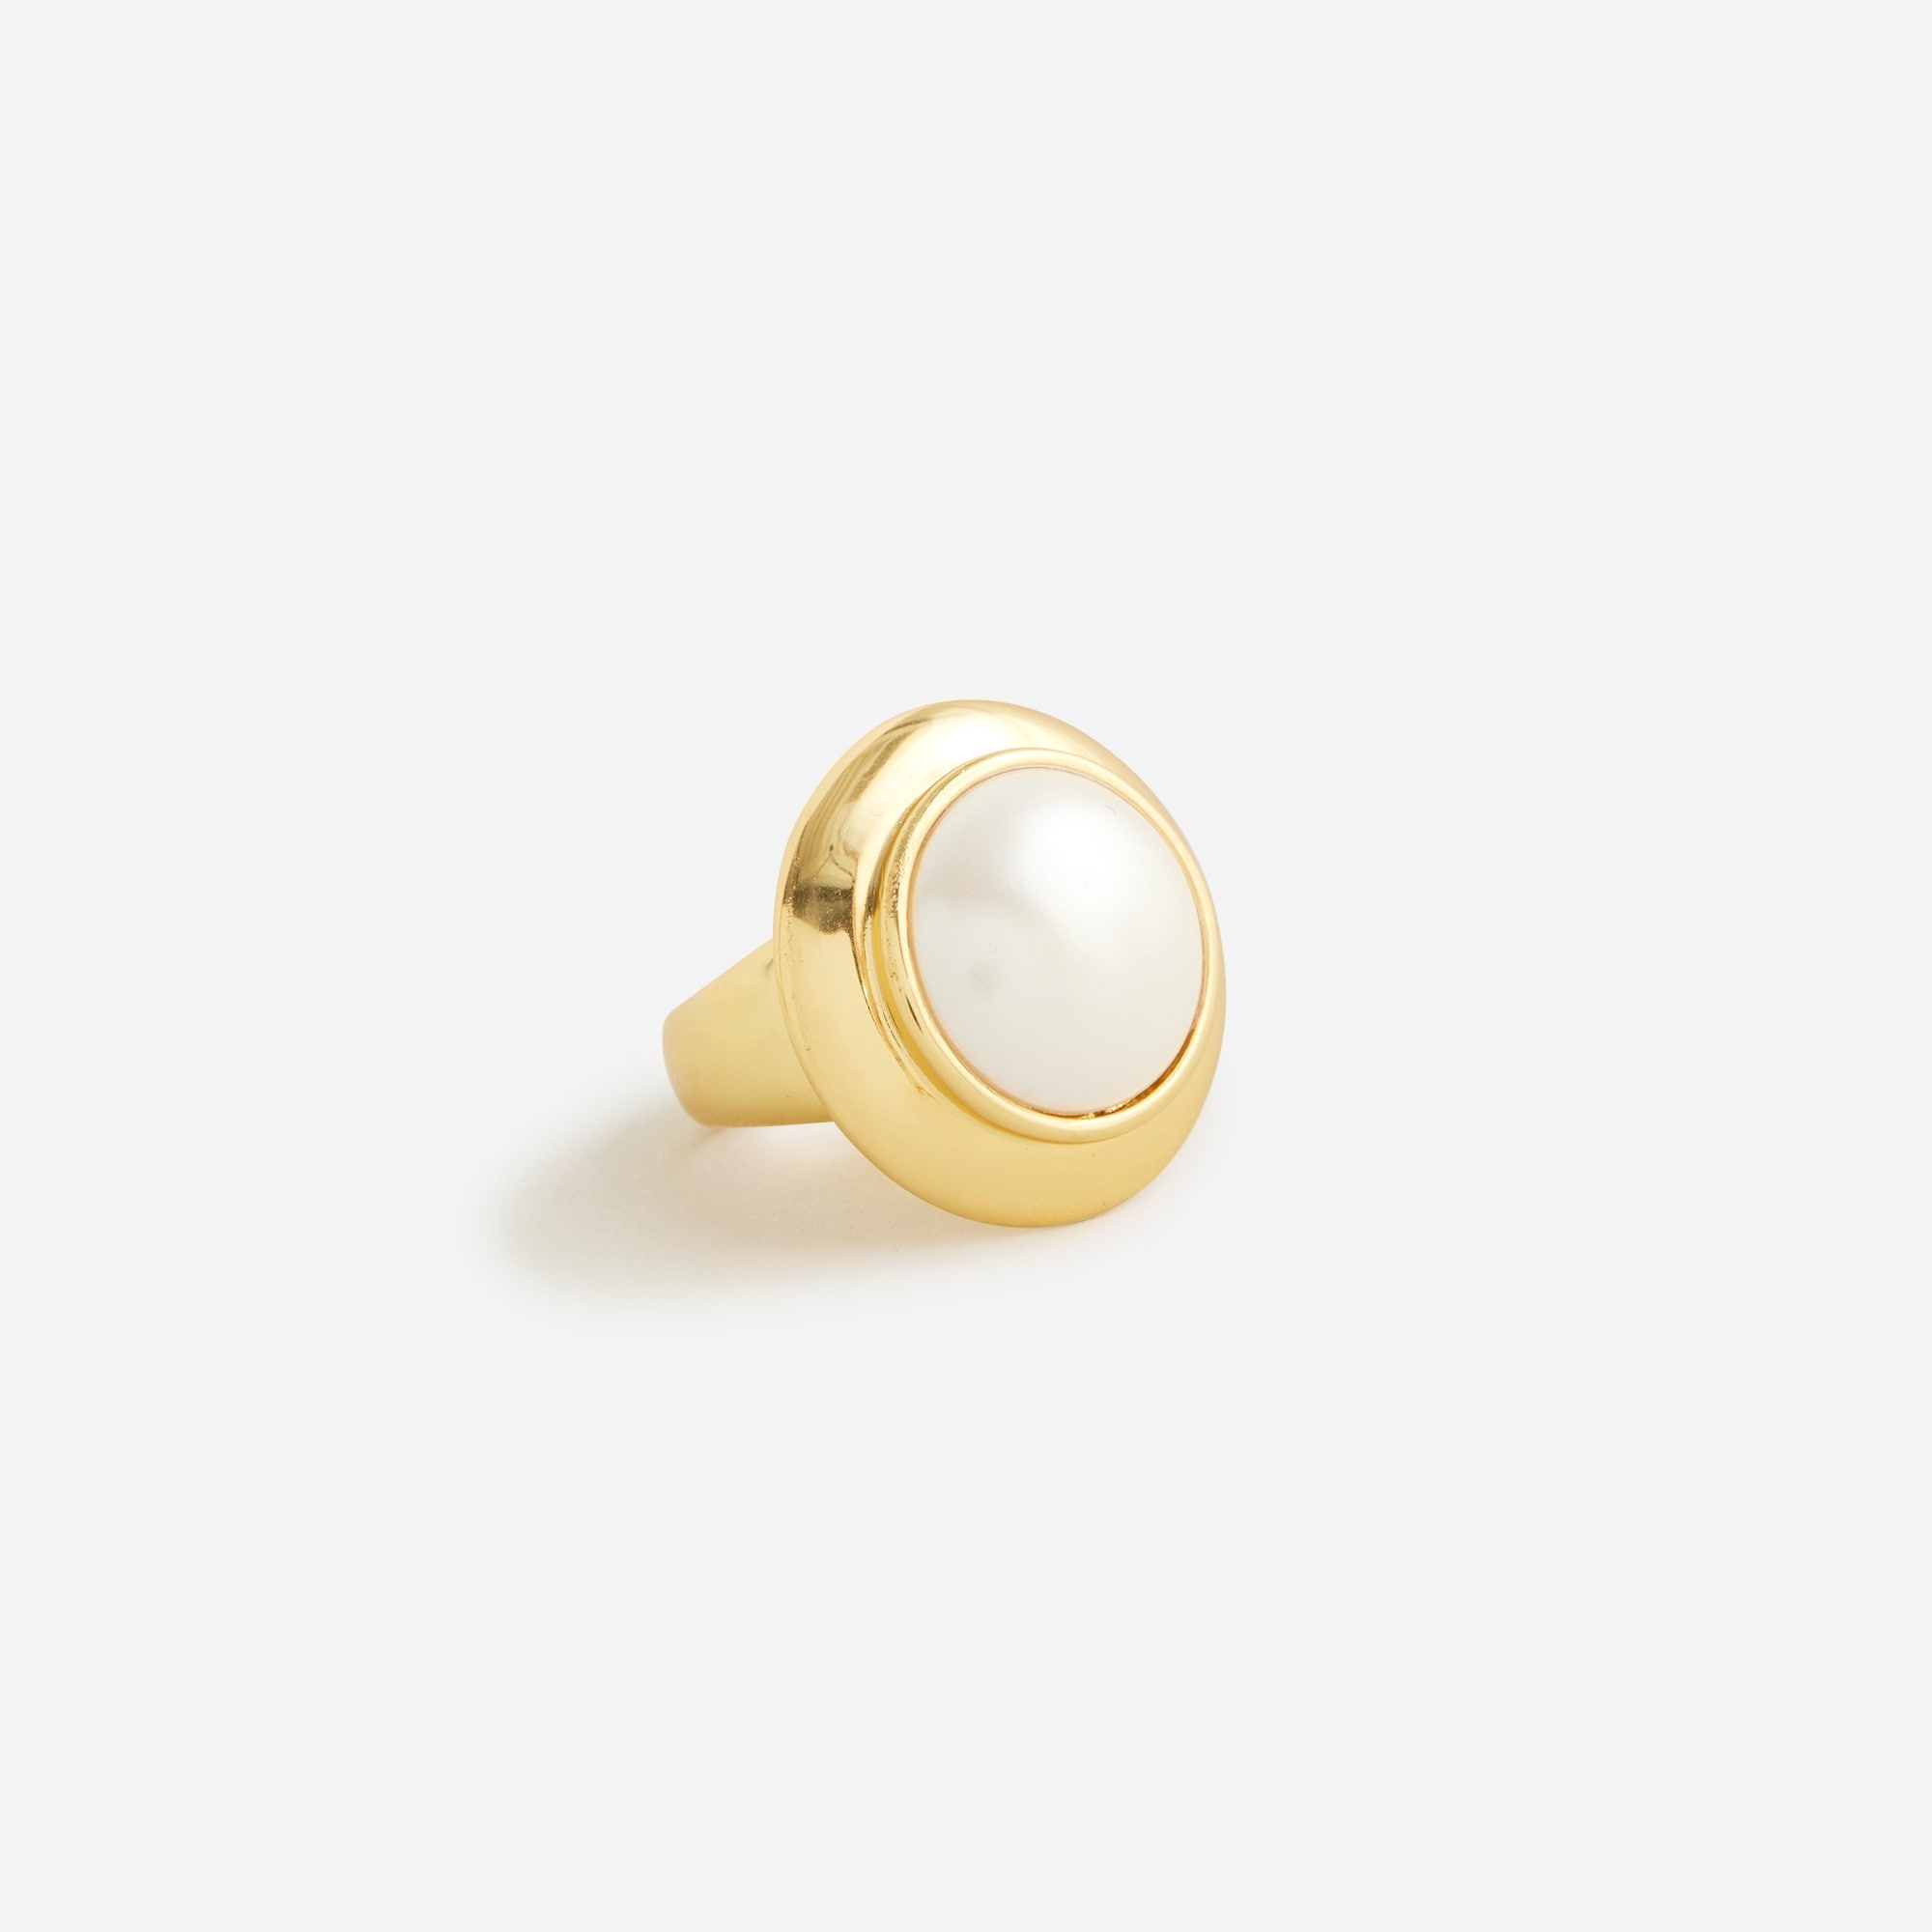  Domed pearl cocktail ring